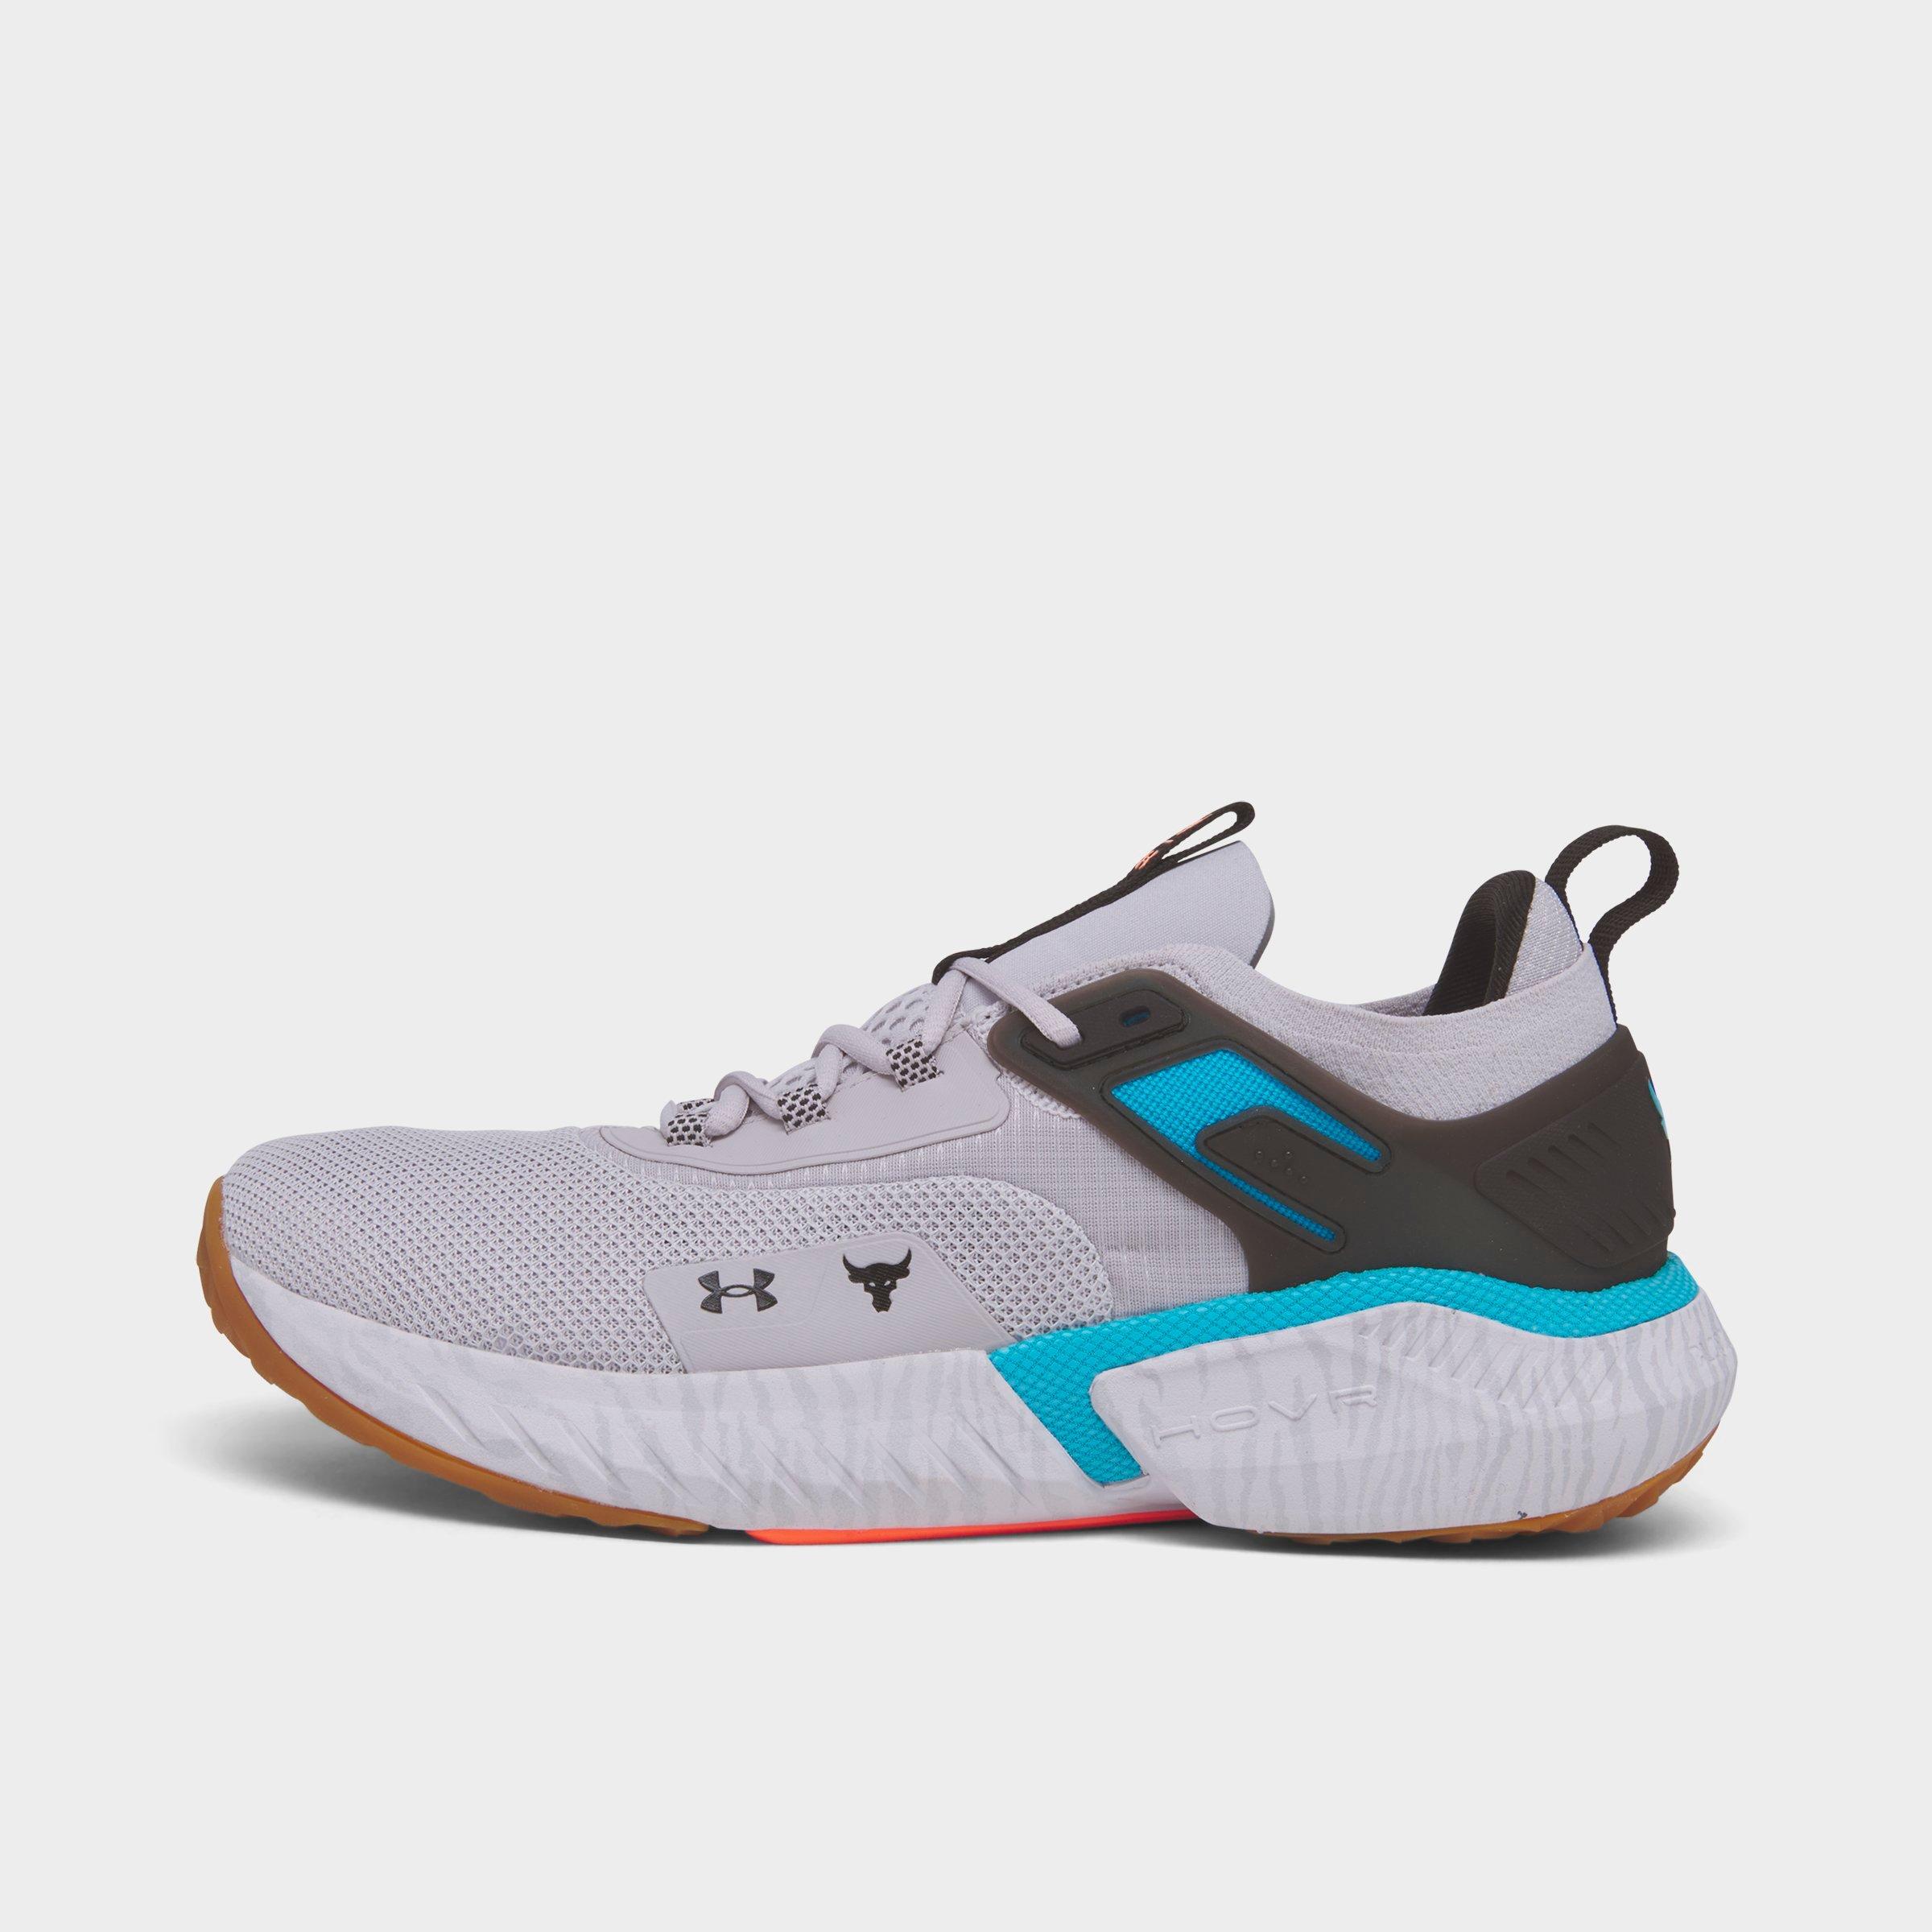 Under Armour Project Rock Training Shoes In Grey Surf |